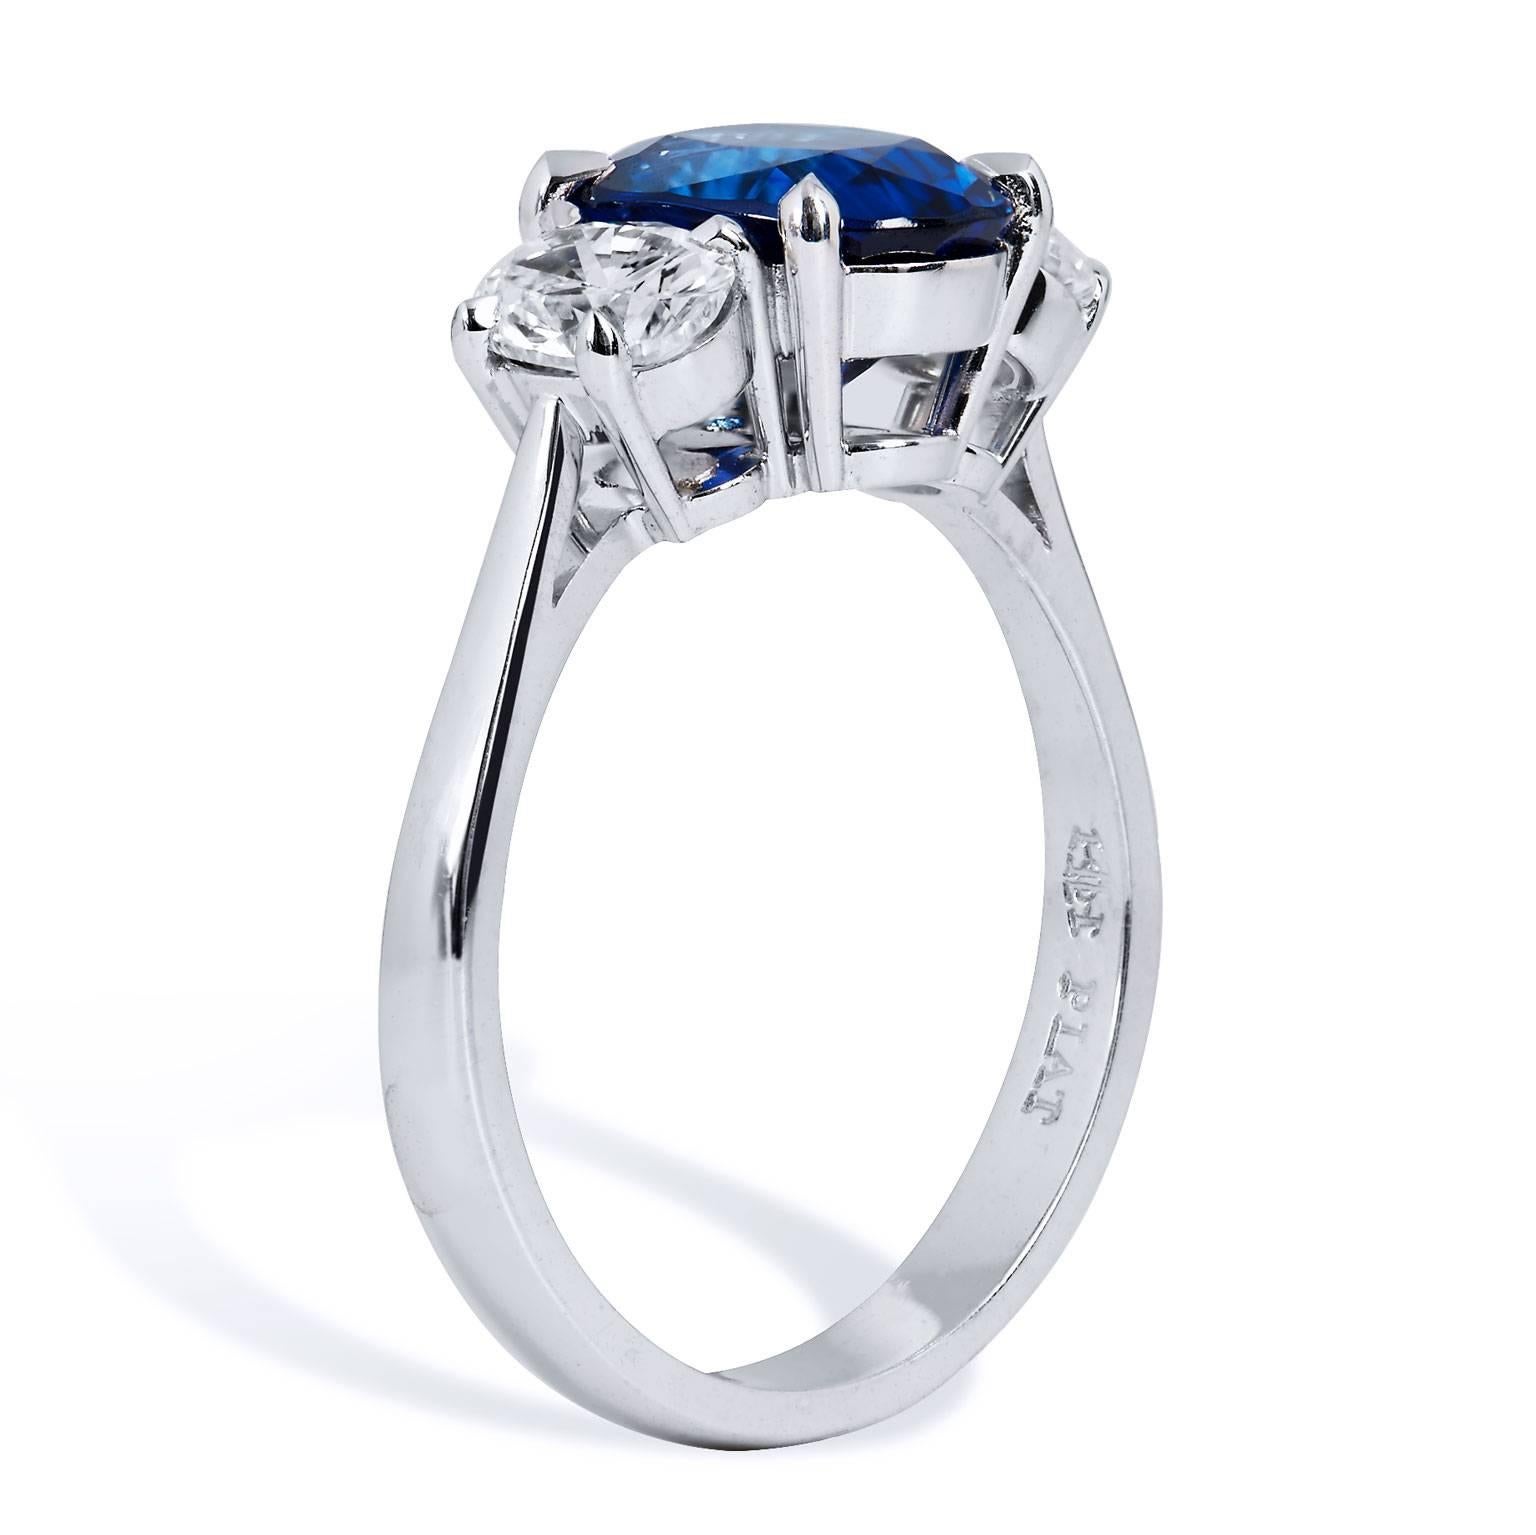 GIA Certified 2.60 Carat Oval Blue Sapphire and Diamond 3 Stone Platinum Ring 

Handmade by H&H Jewels, this blue sapphire, diamond and platinum ring has a 2.60 carat oval blue sapphire is set at center (GIA #1172965382), and 0.80 carats of oval